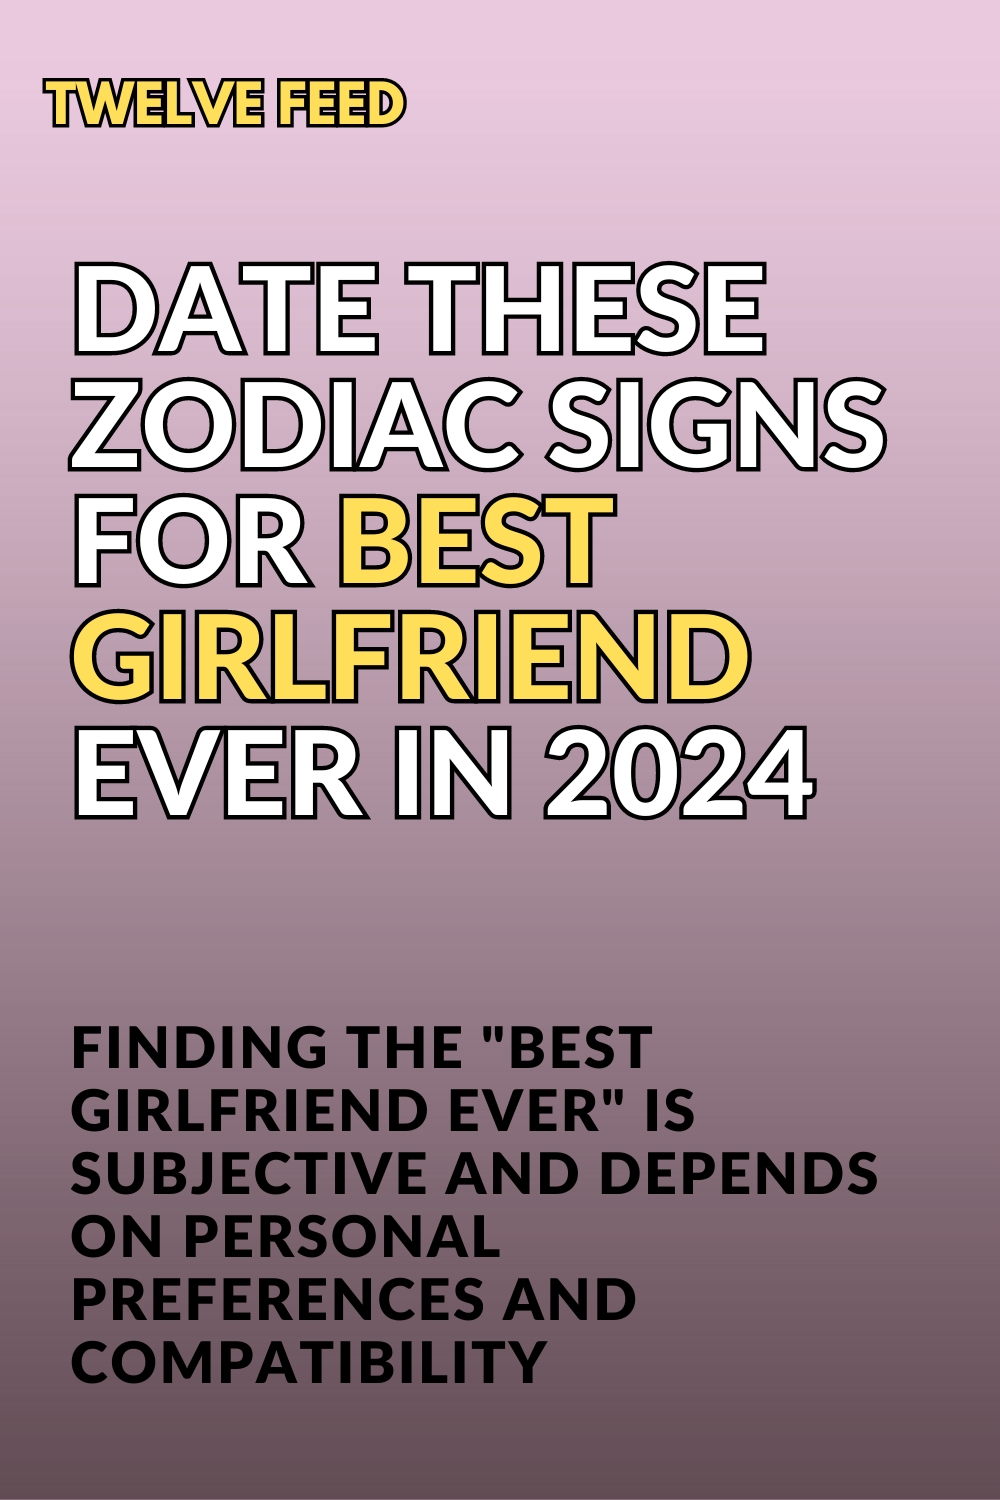 Date These Zodiac Signs For Best Girlfriend Ever In 2024